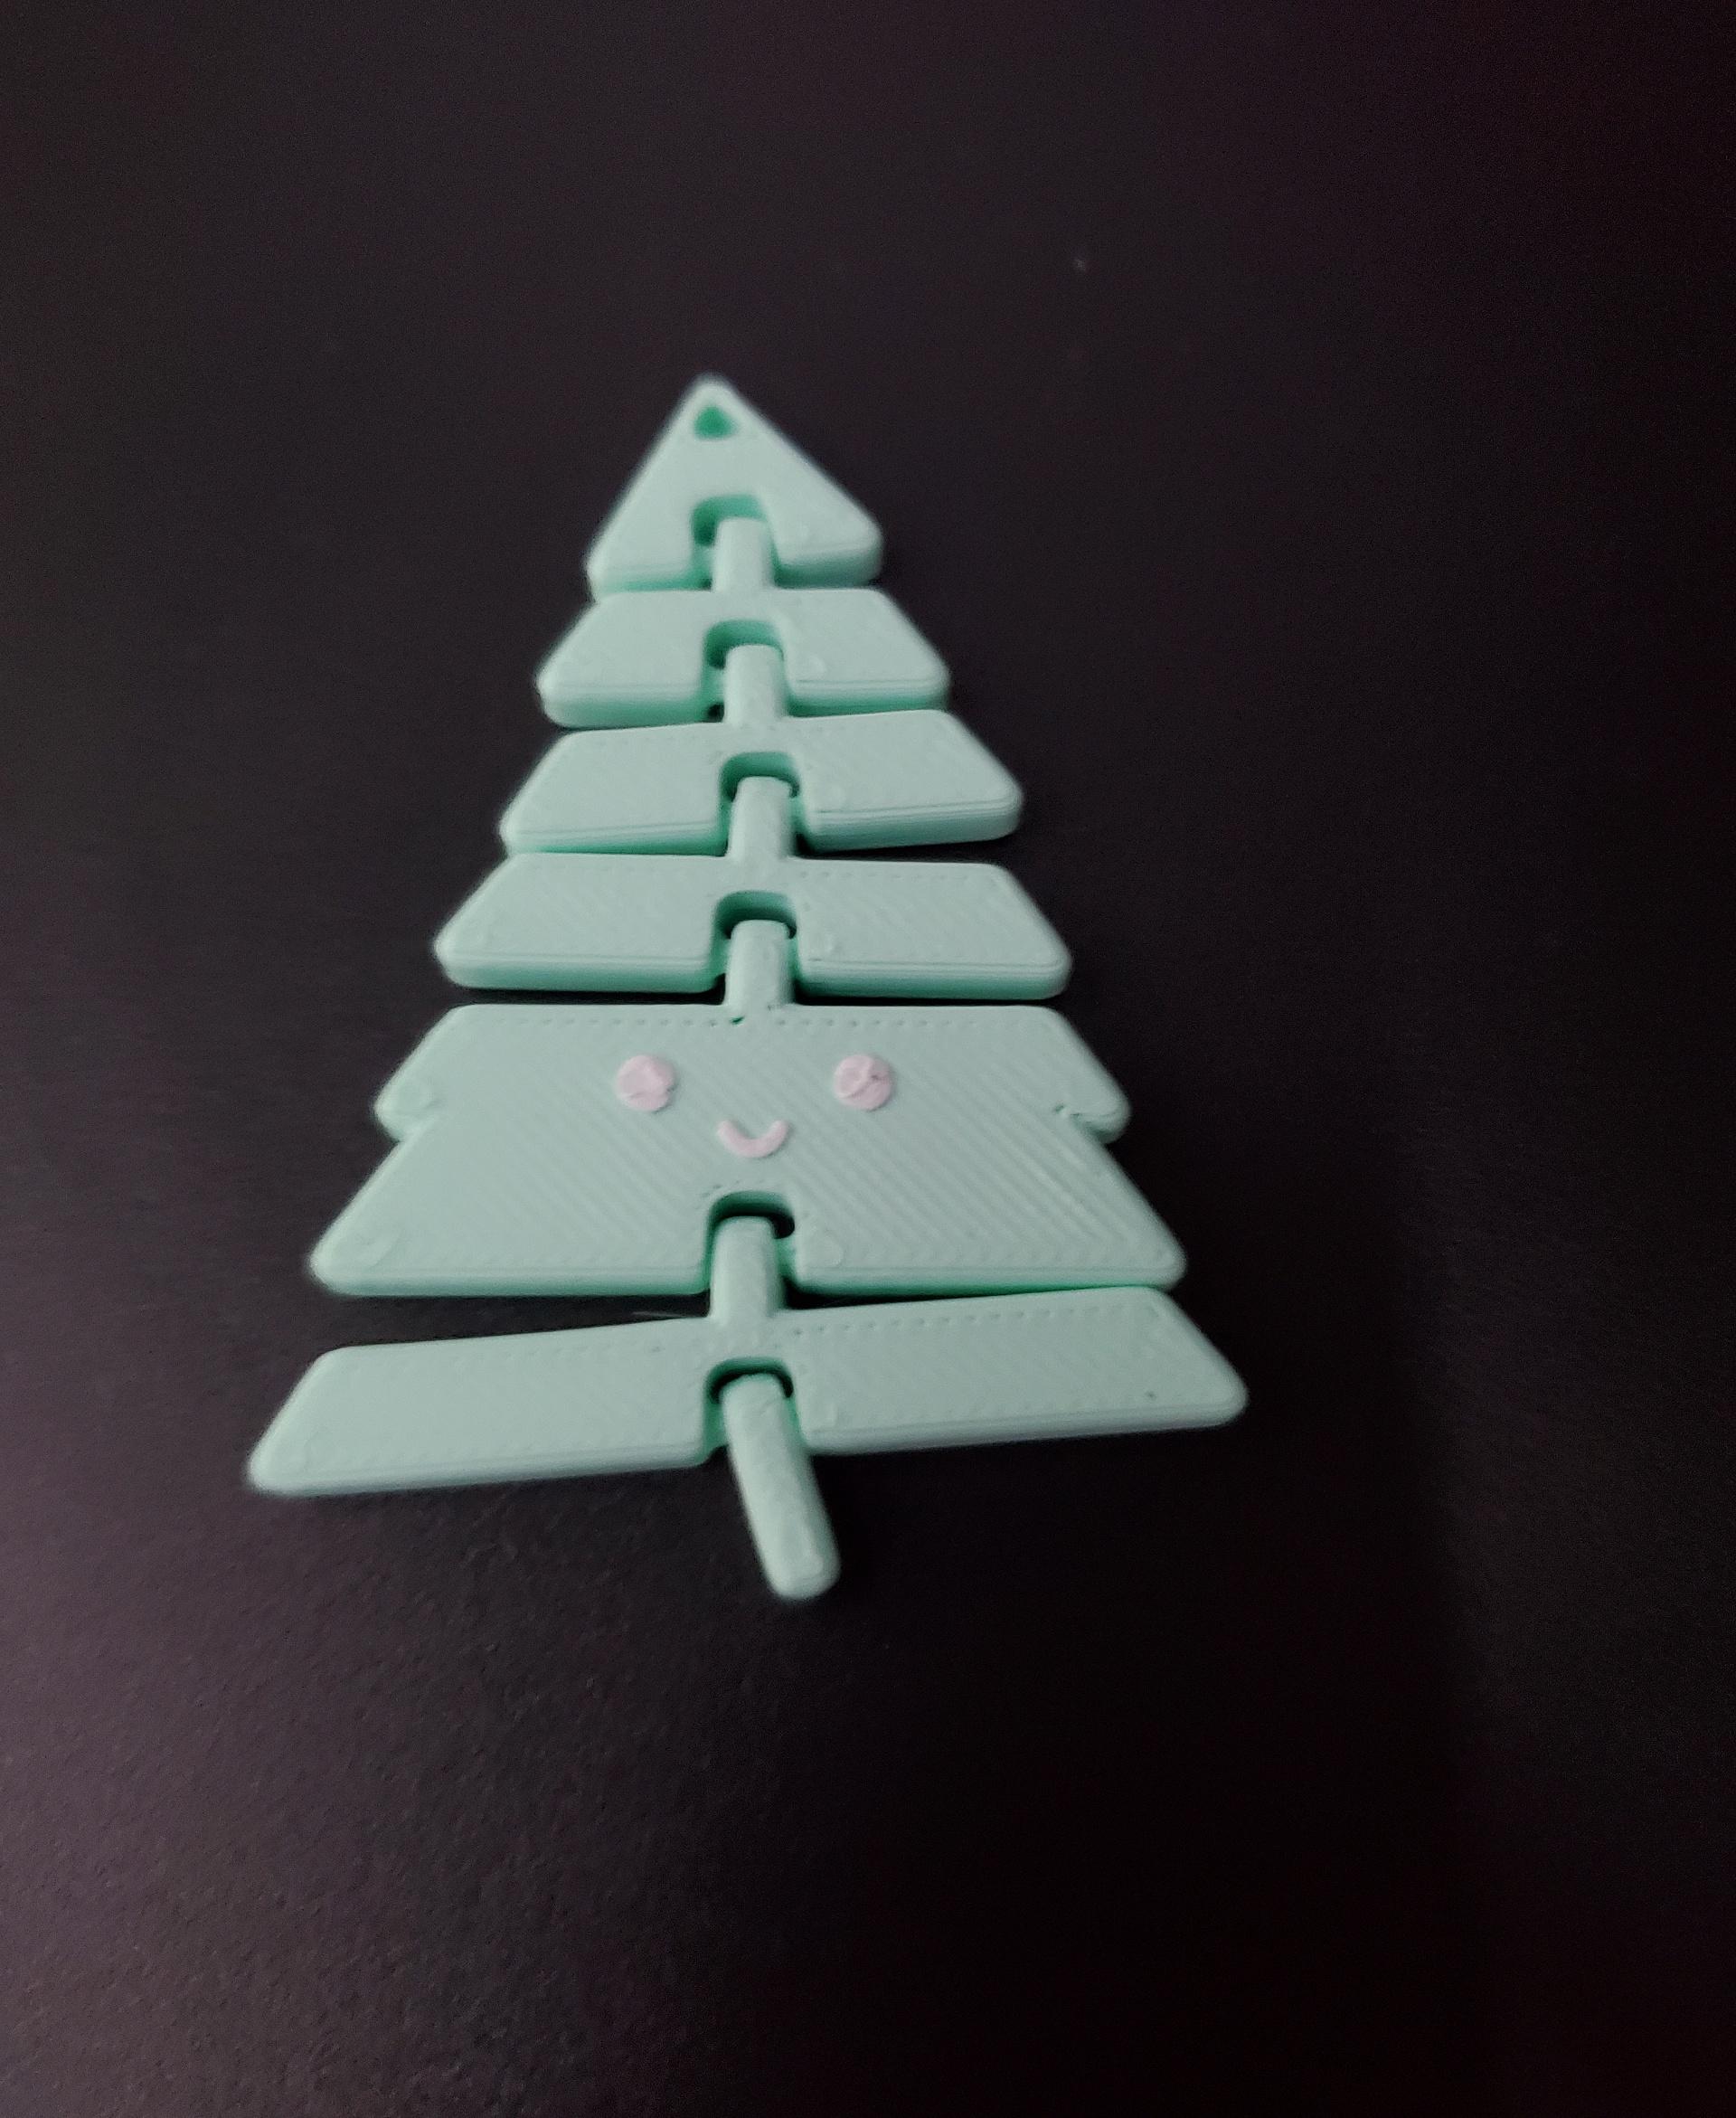 Articulated Kawaii Christmas Tree Keychain - Print in place fidget toy - 3mf - hobbyking pastel green - 3d model